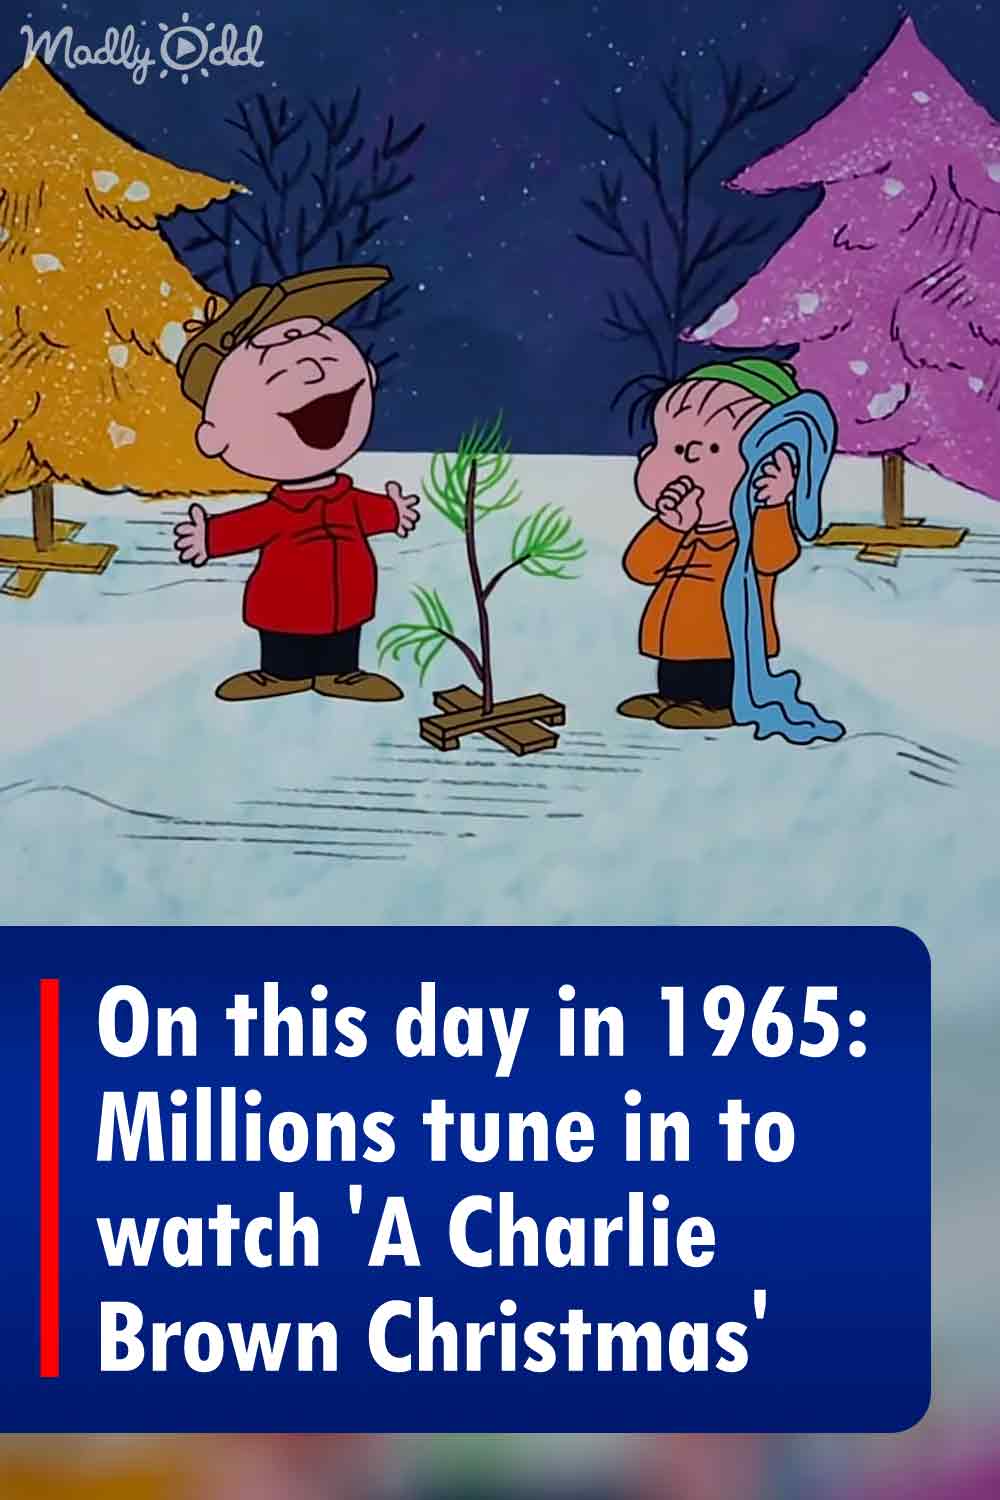 On this day in 1965: Millions tune in to watch \'A Charlie Brown Christmas\'